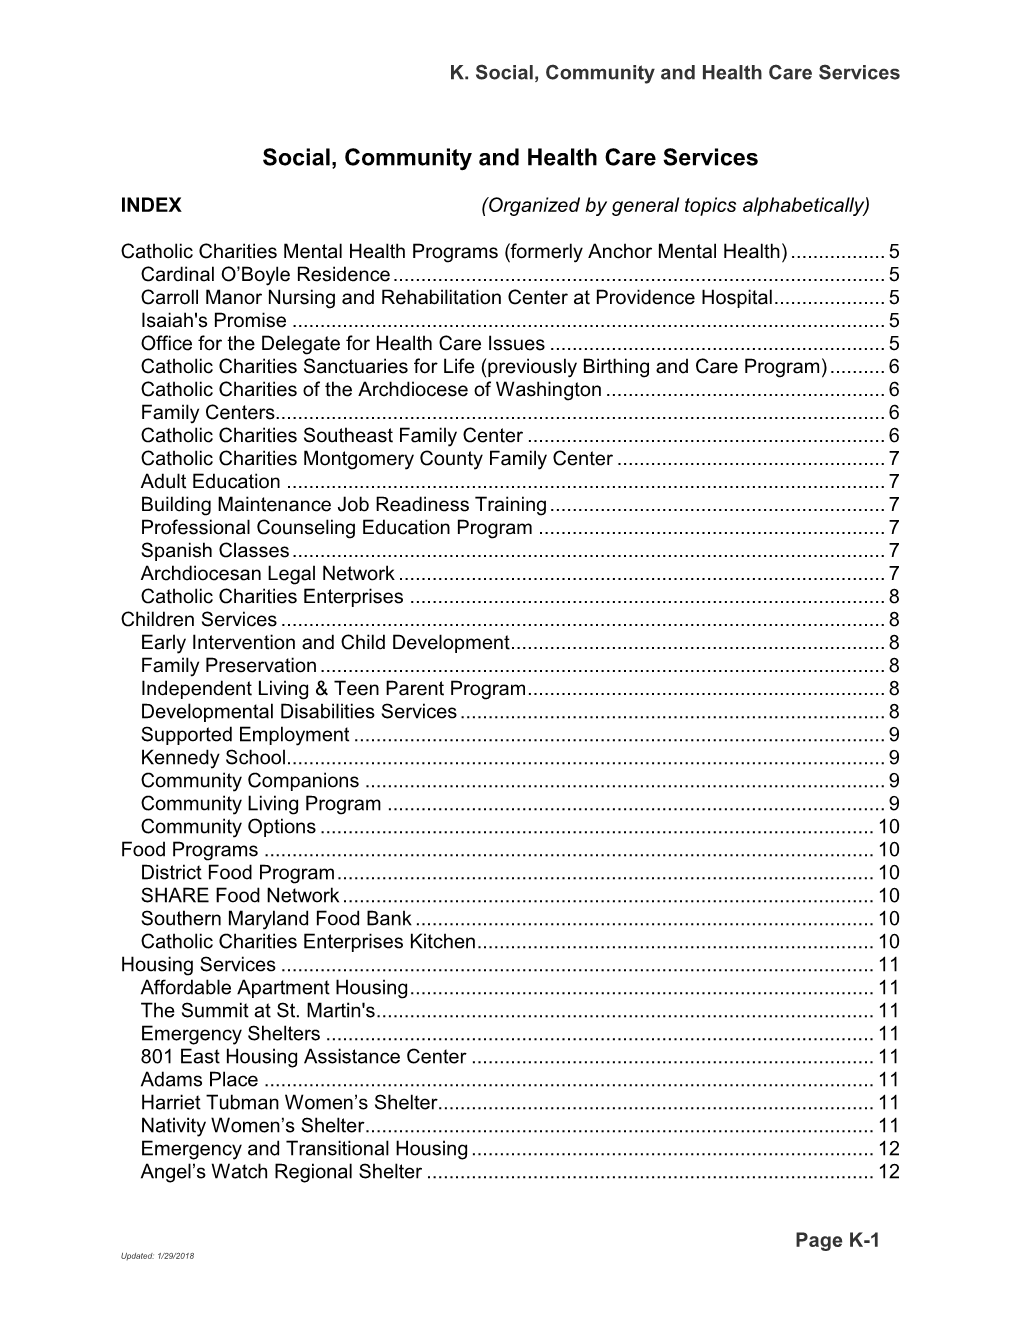 Social, Community and Health Care Services